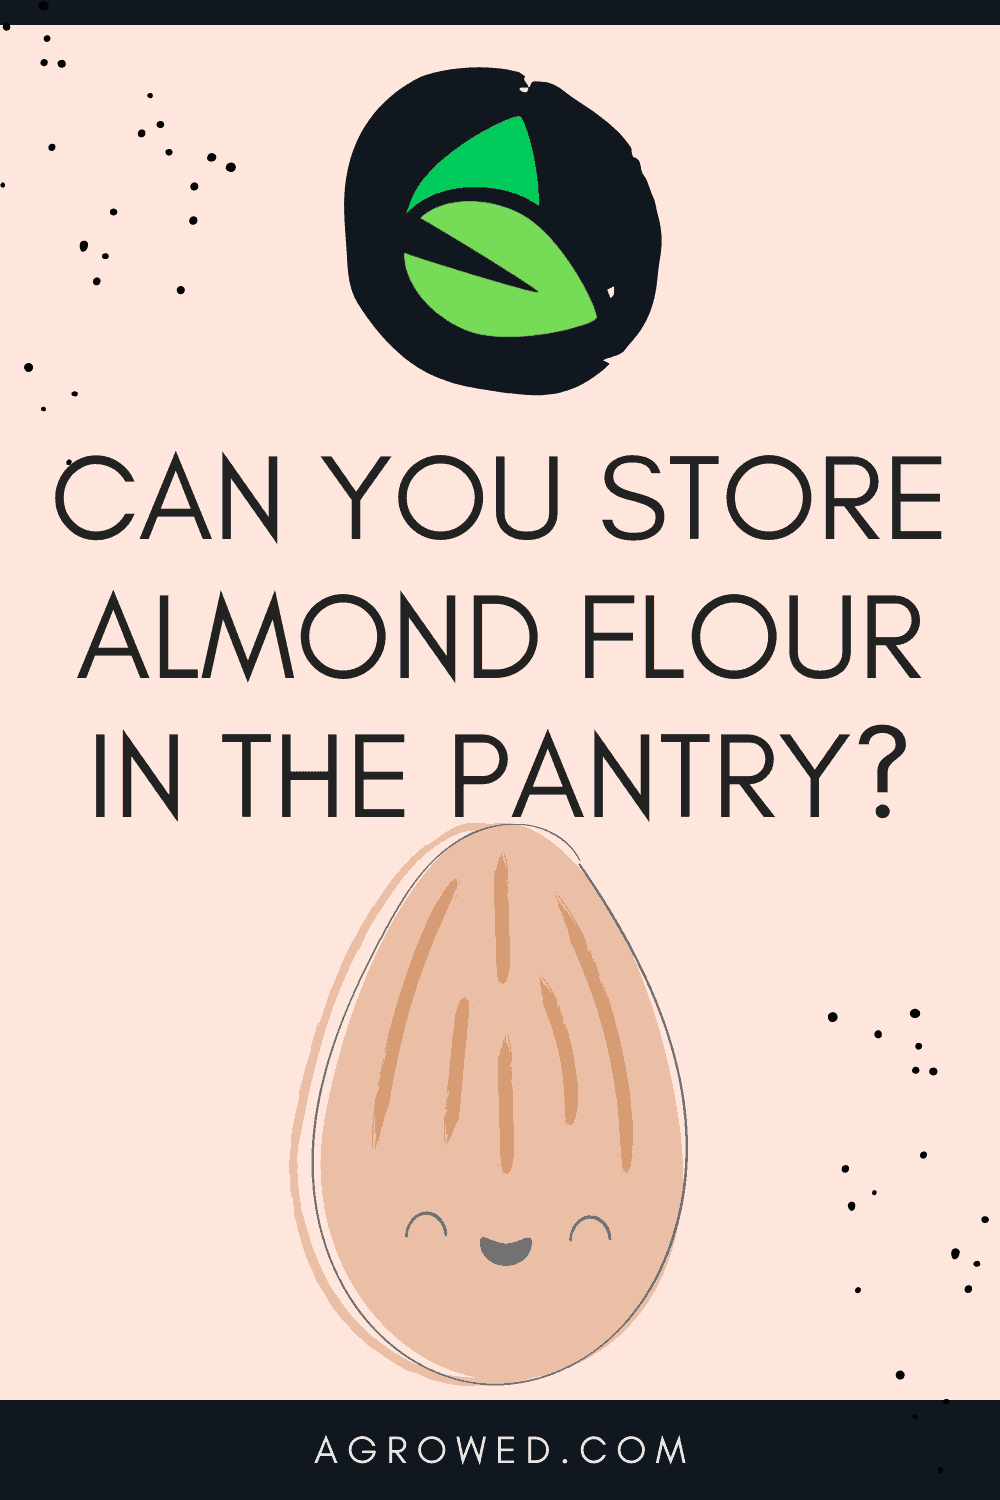 Can You Store Almond Flour in the Pantry